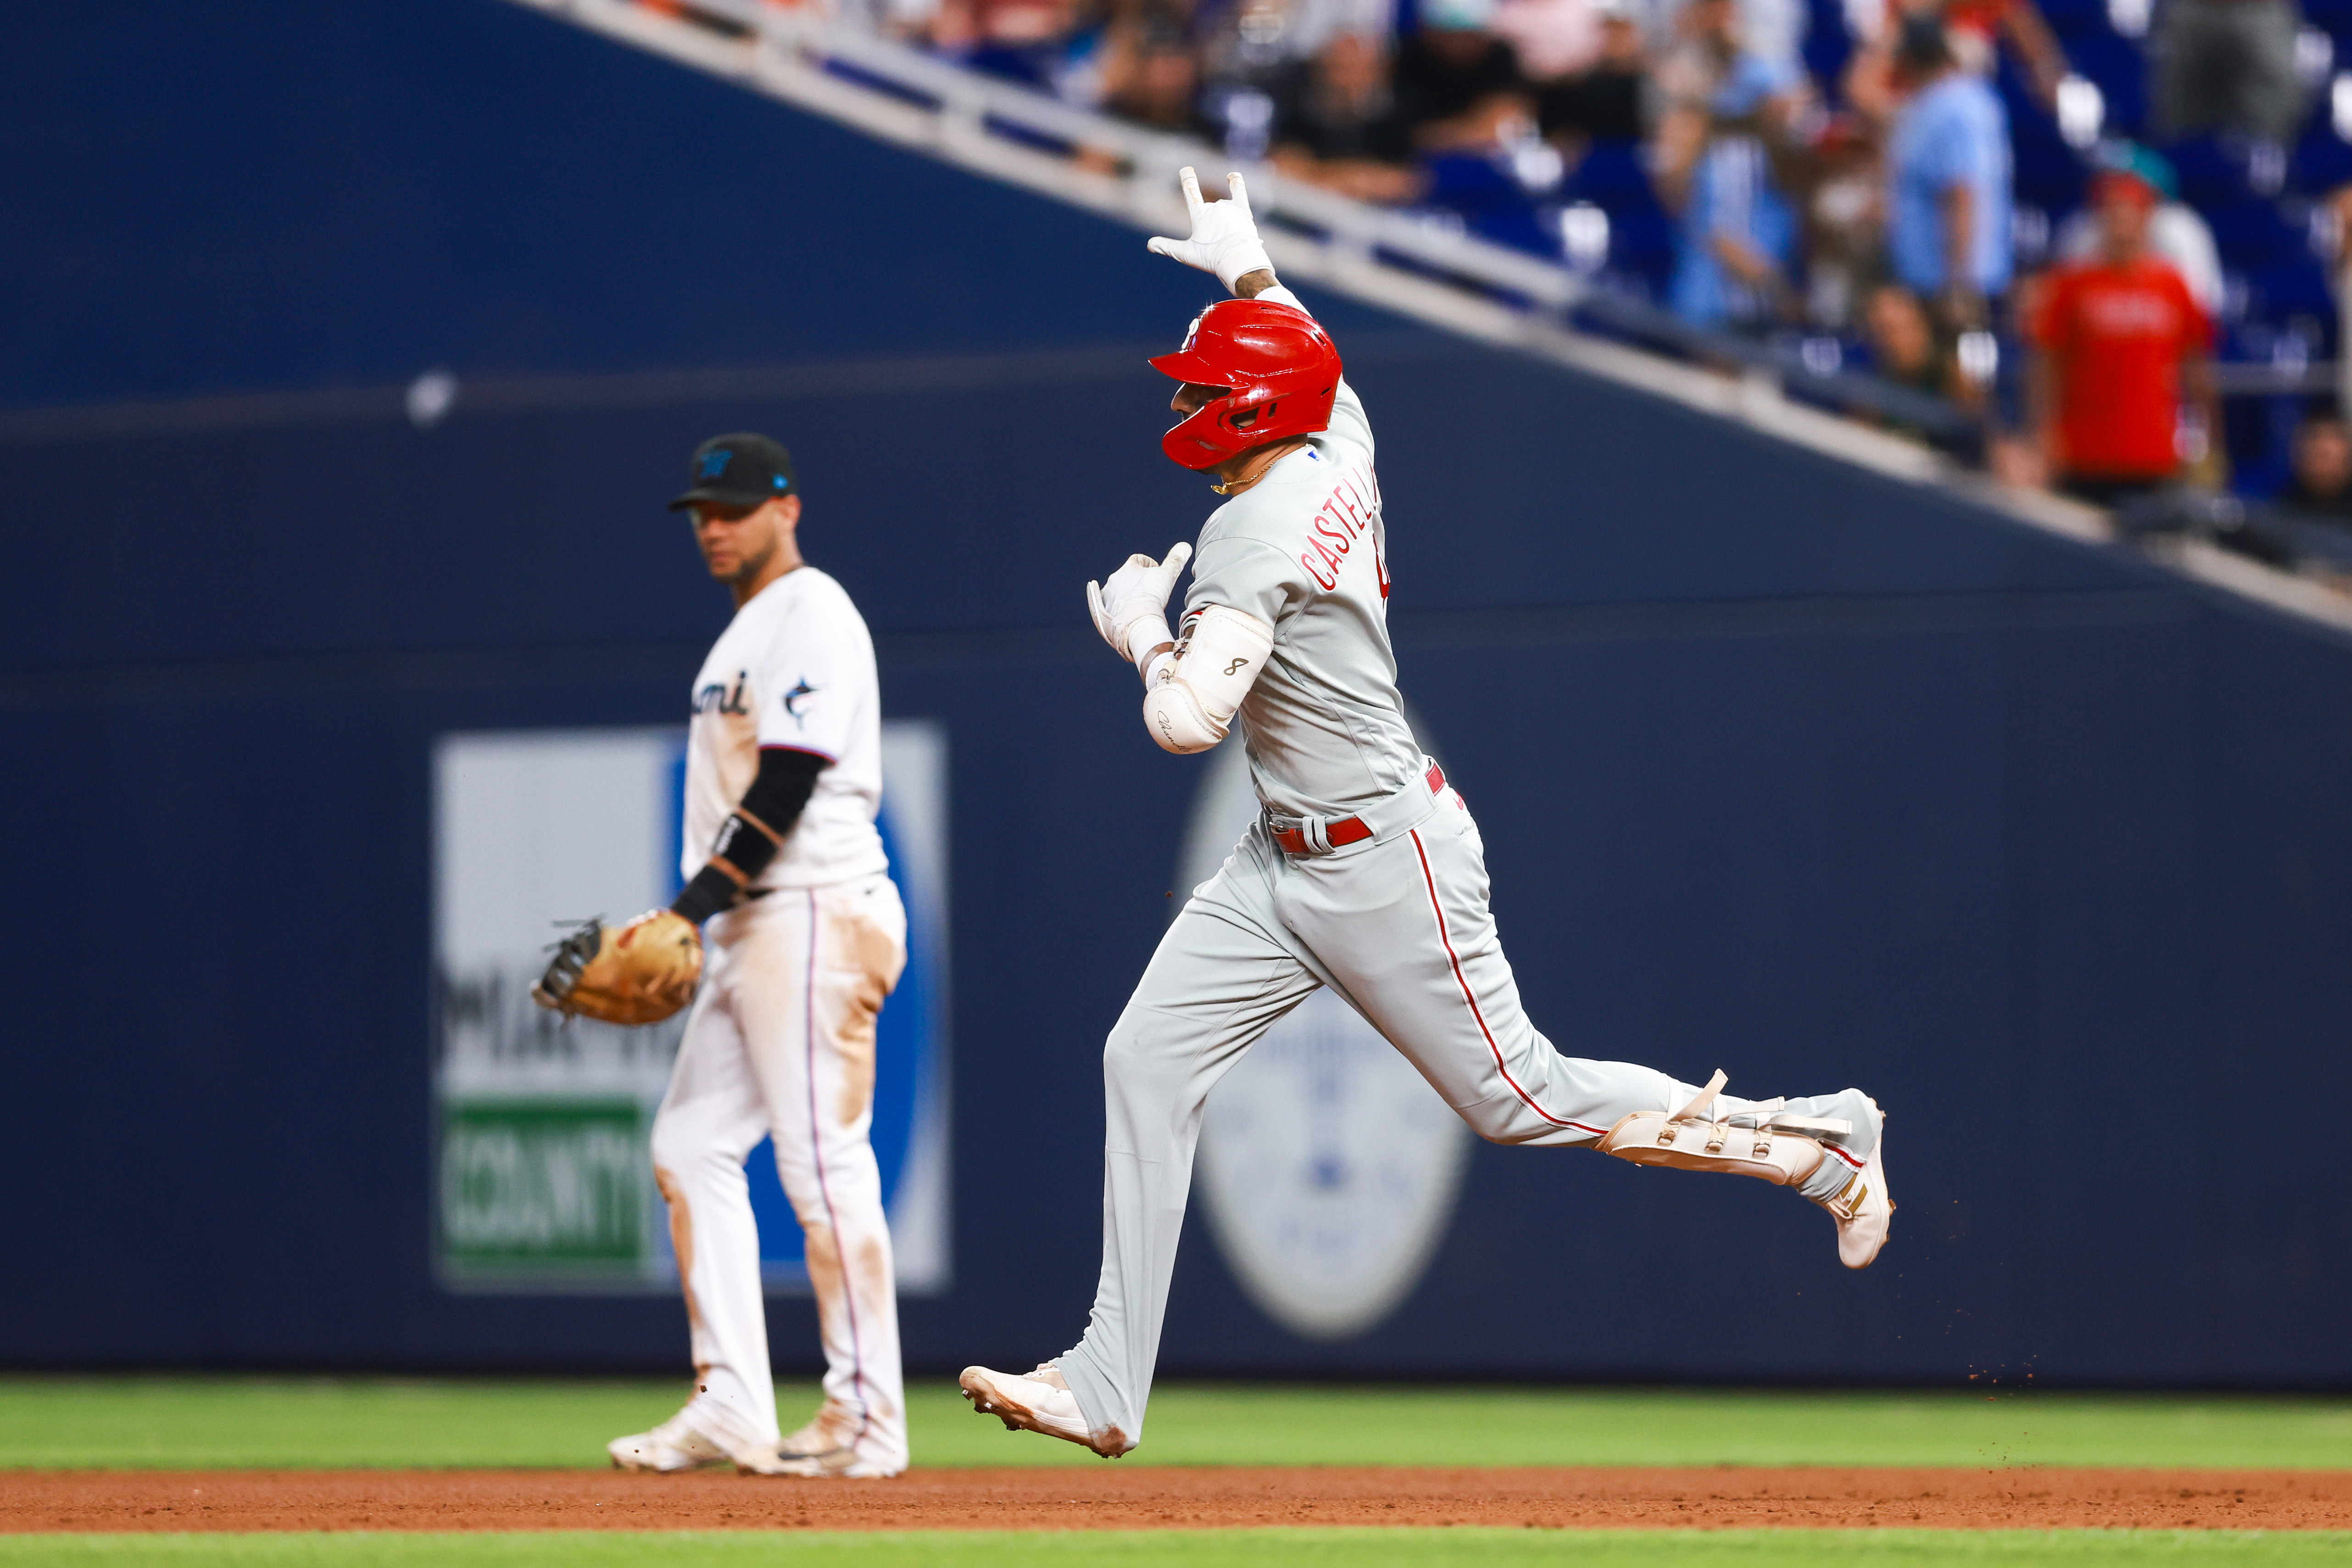 Lorenzen shuts down the Marlins in his Phillies debut. Realmuto